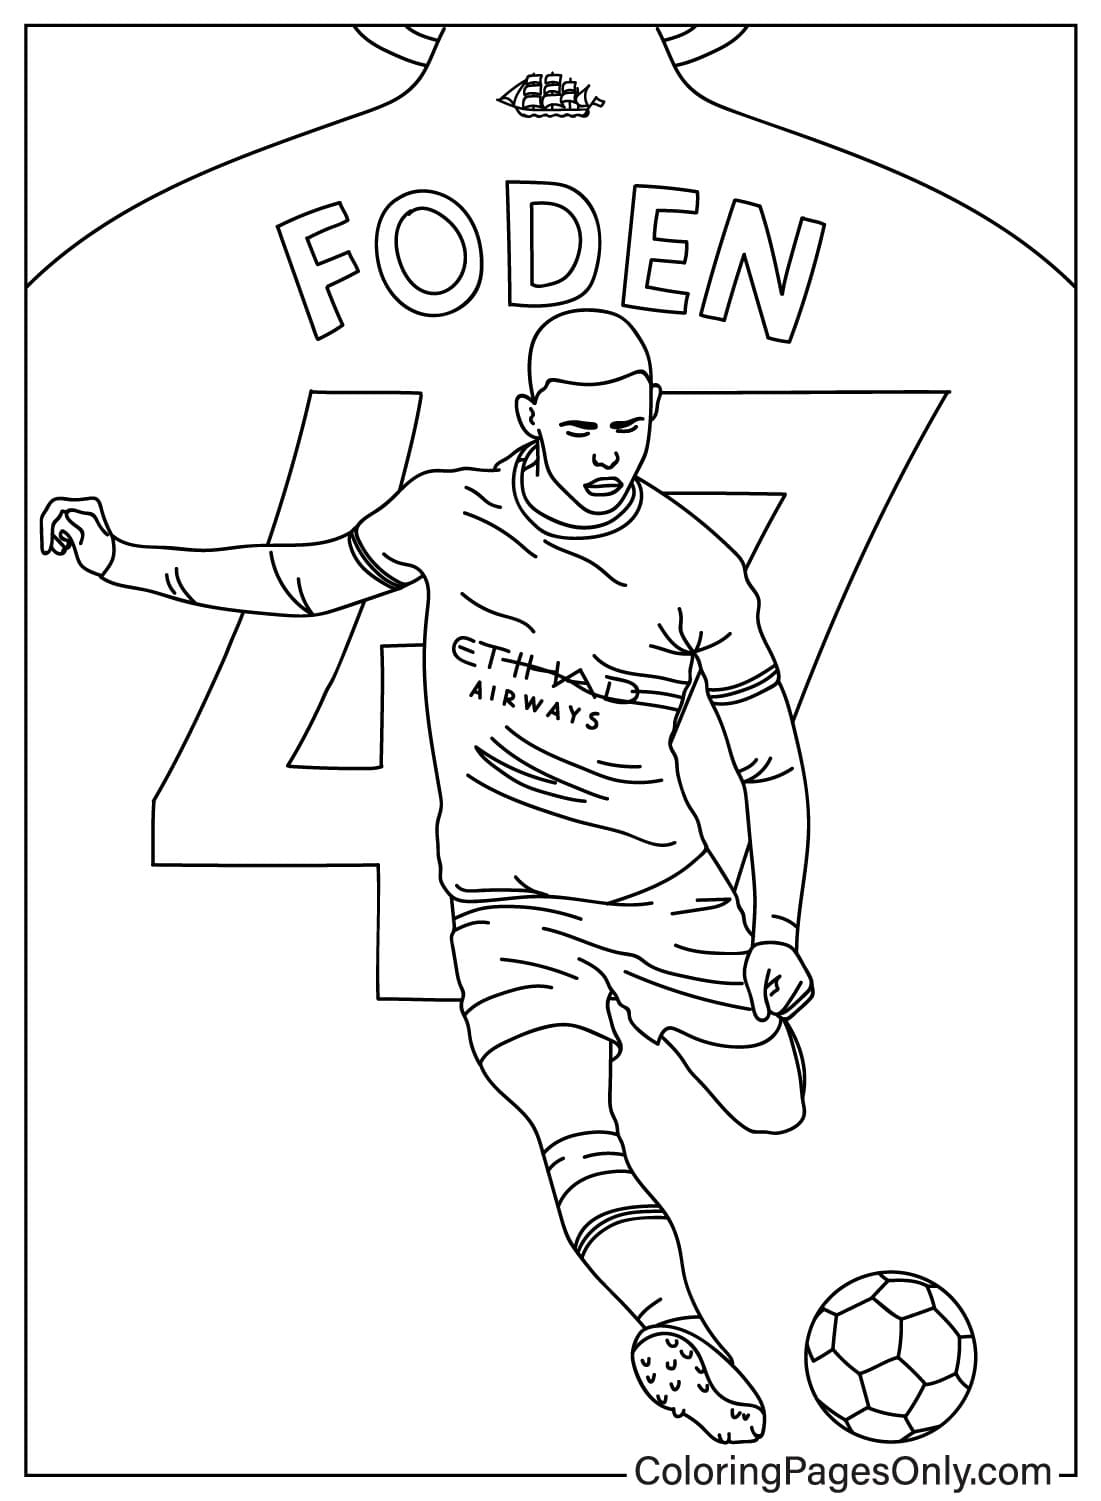 Phil Foden Coloring Book from Phil Foden